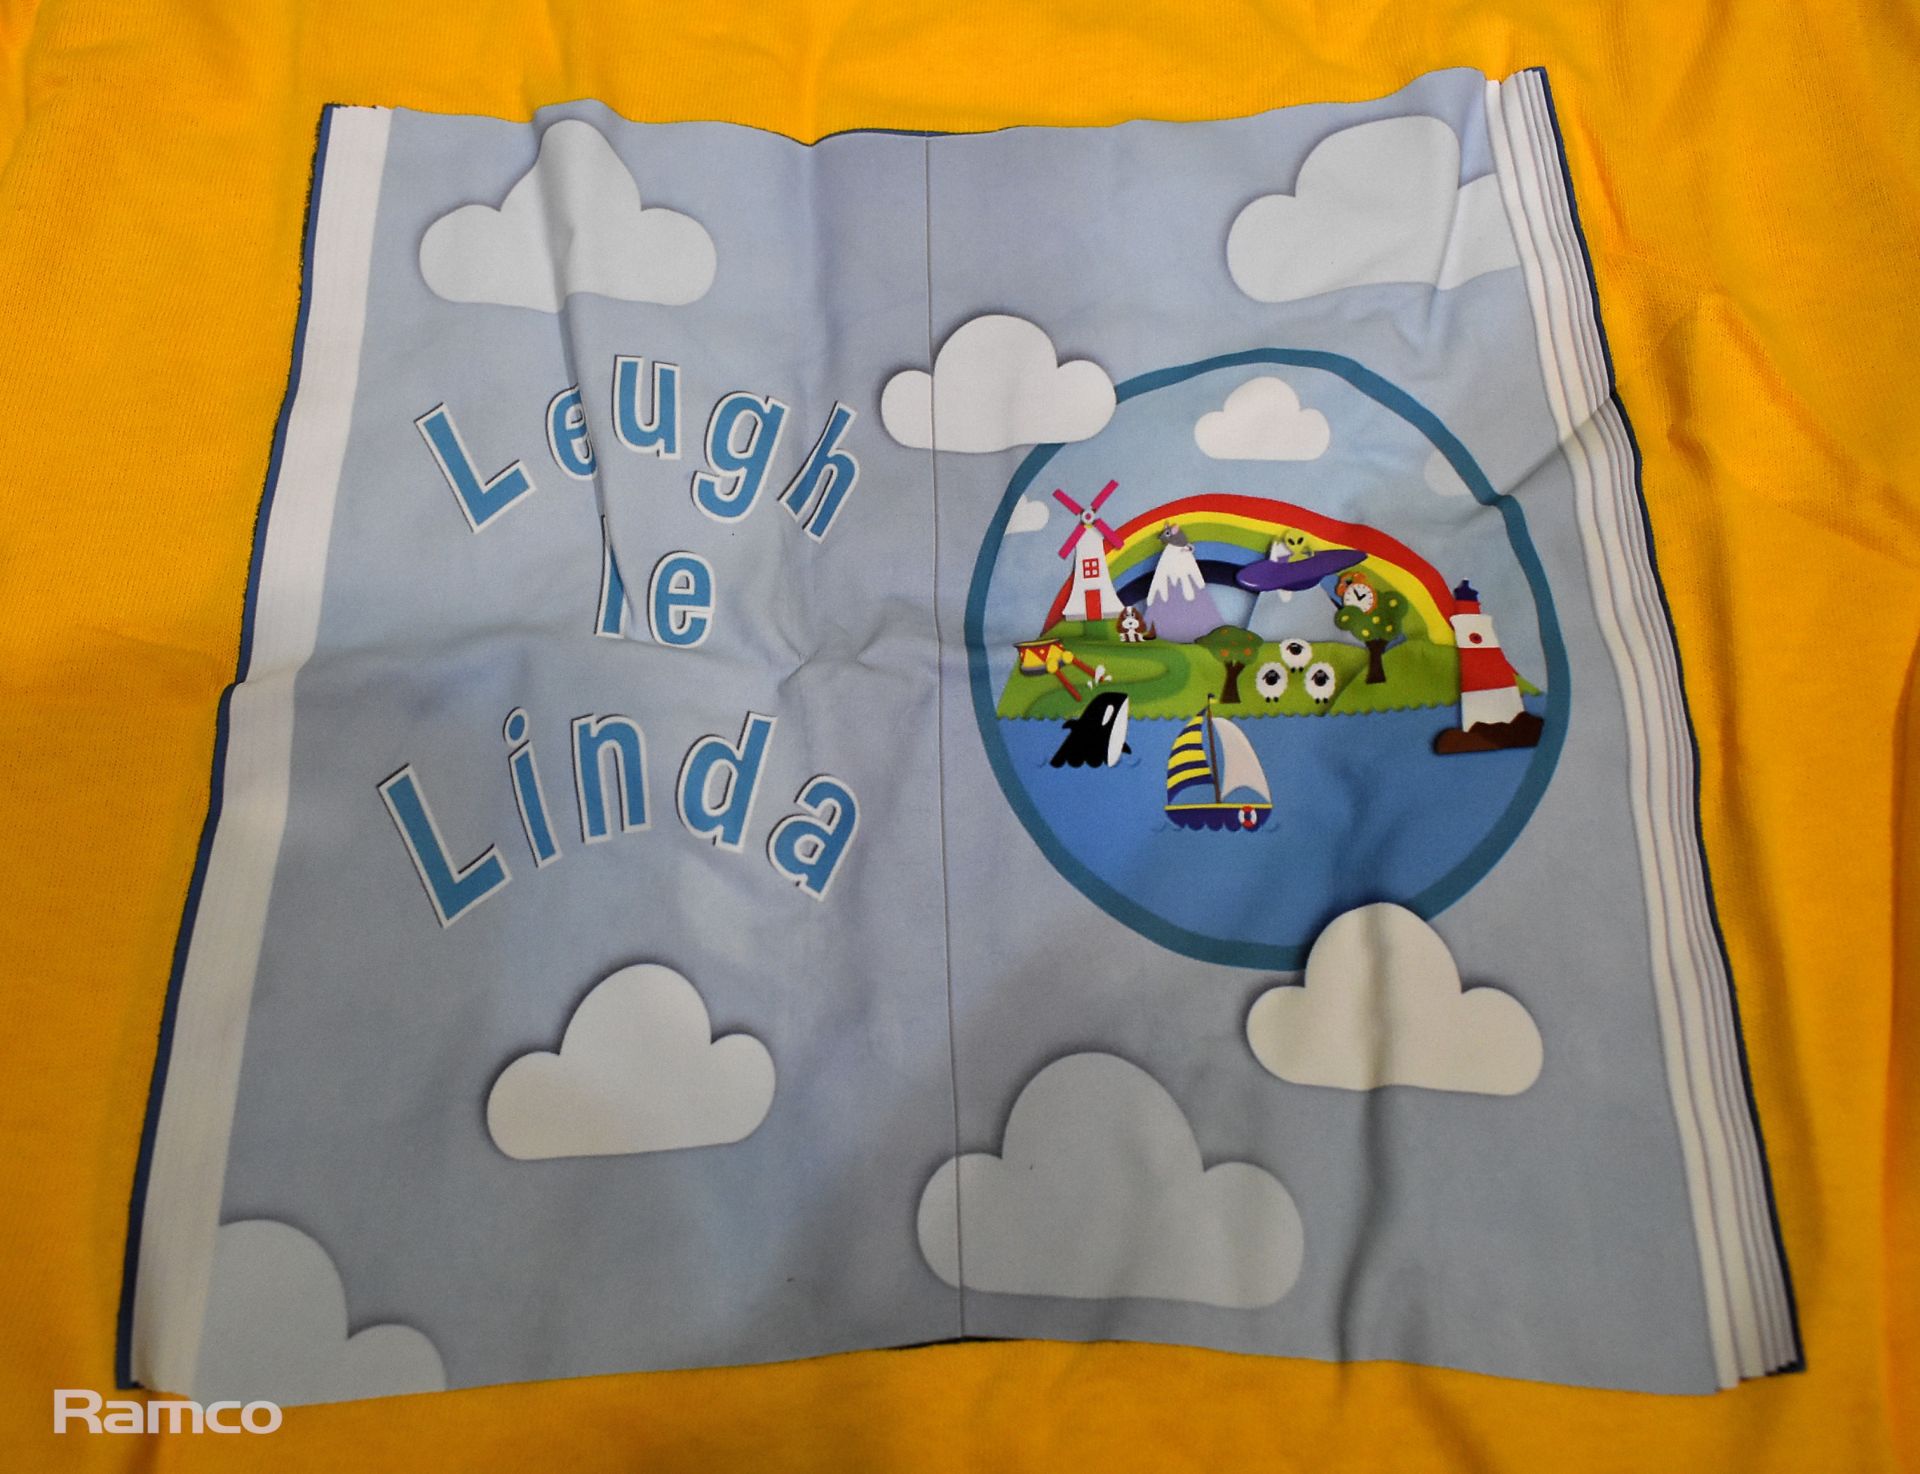 75x Youth T-Shirts with "Leugh Le Linda" of assorted colours and size - Image 3 of 5